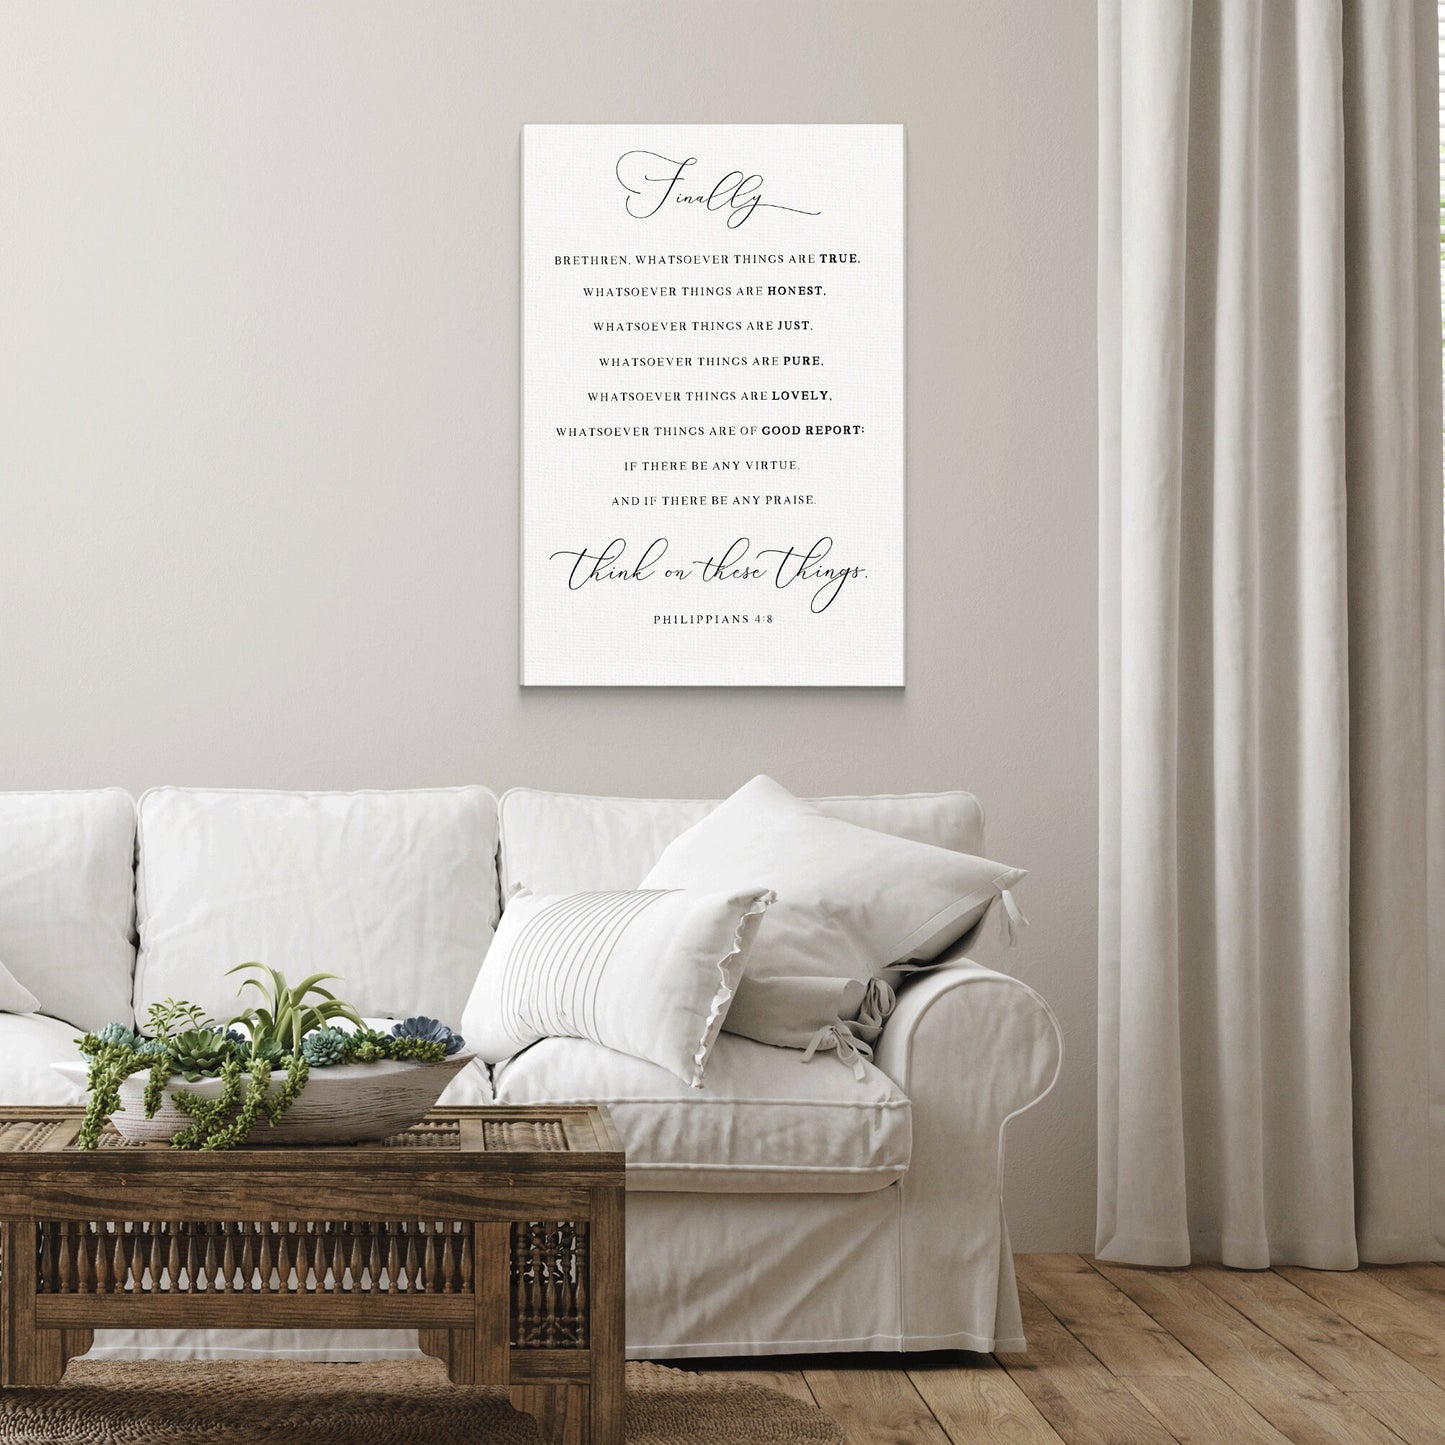 Think On These Things | Scripture Sign | Christian Wall Decor | Bible Verse Wall Art Sign | Philippians 4:8 Sign With Frame Options